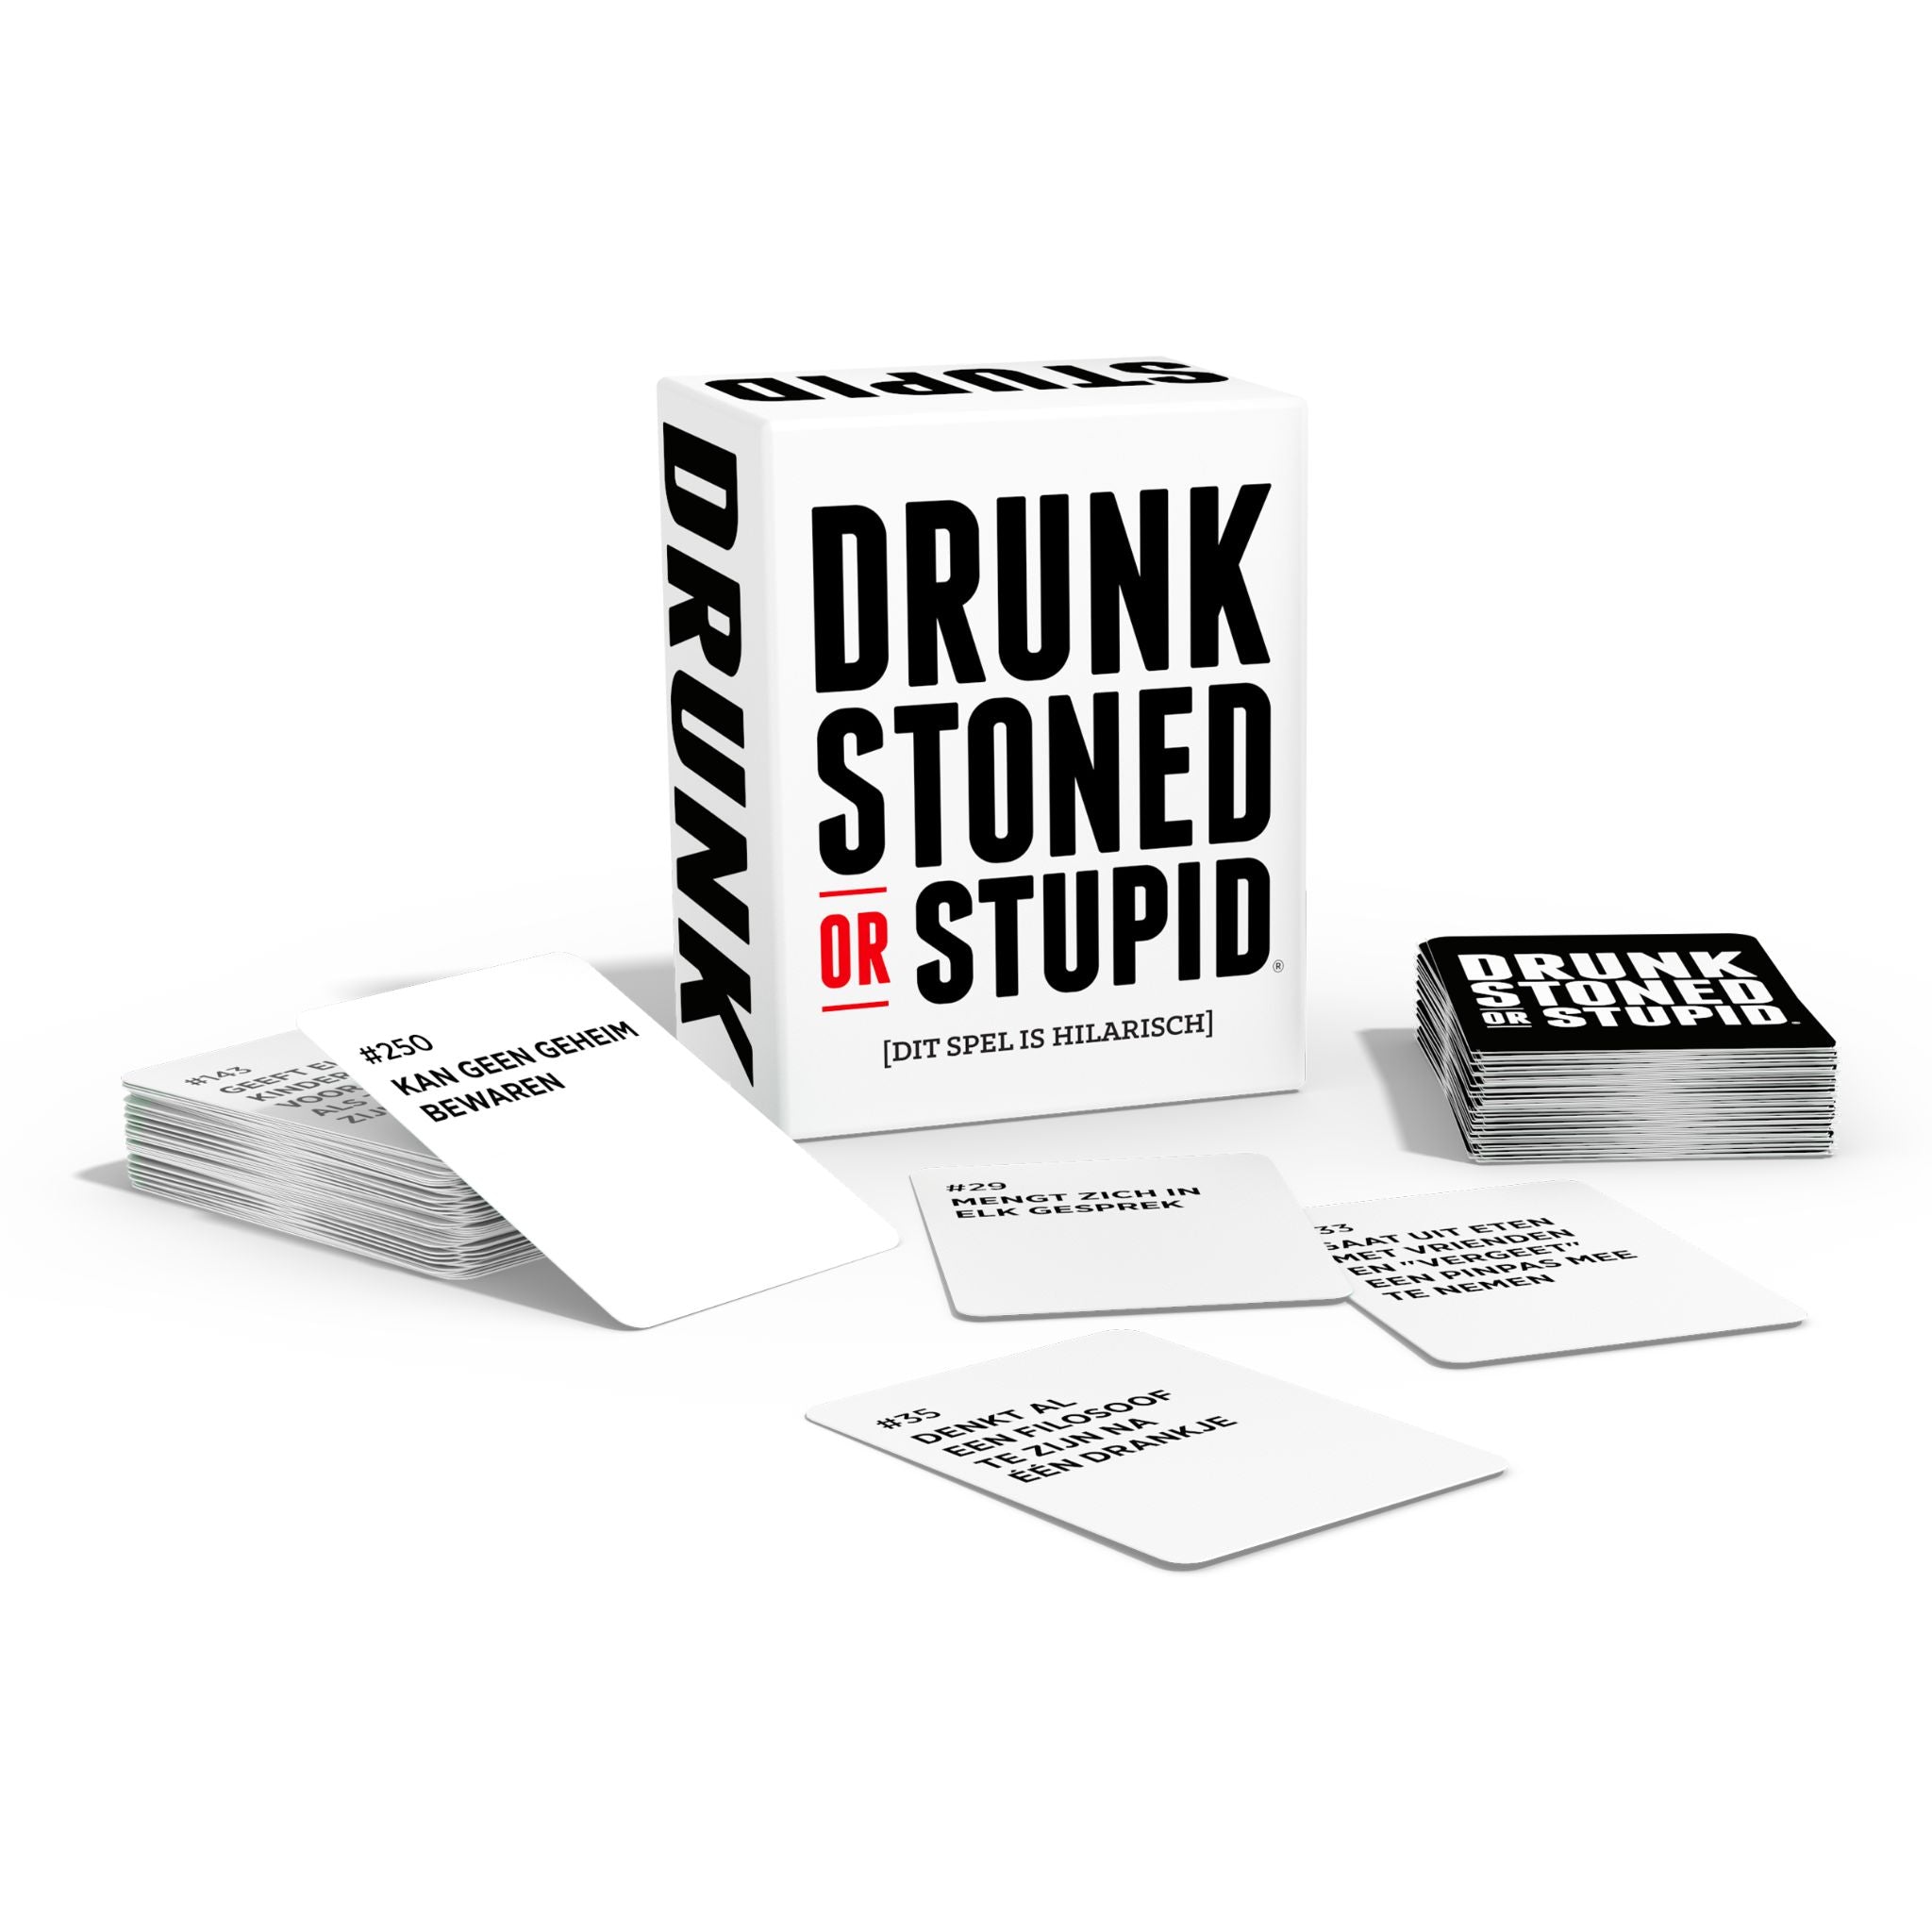 Drunk Stoned or Stupid: A Party Game – Kessel Run Games Inc.